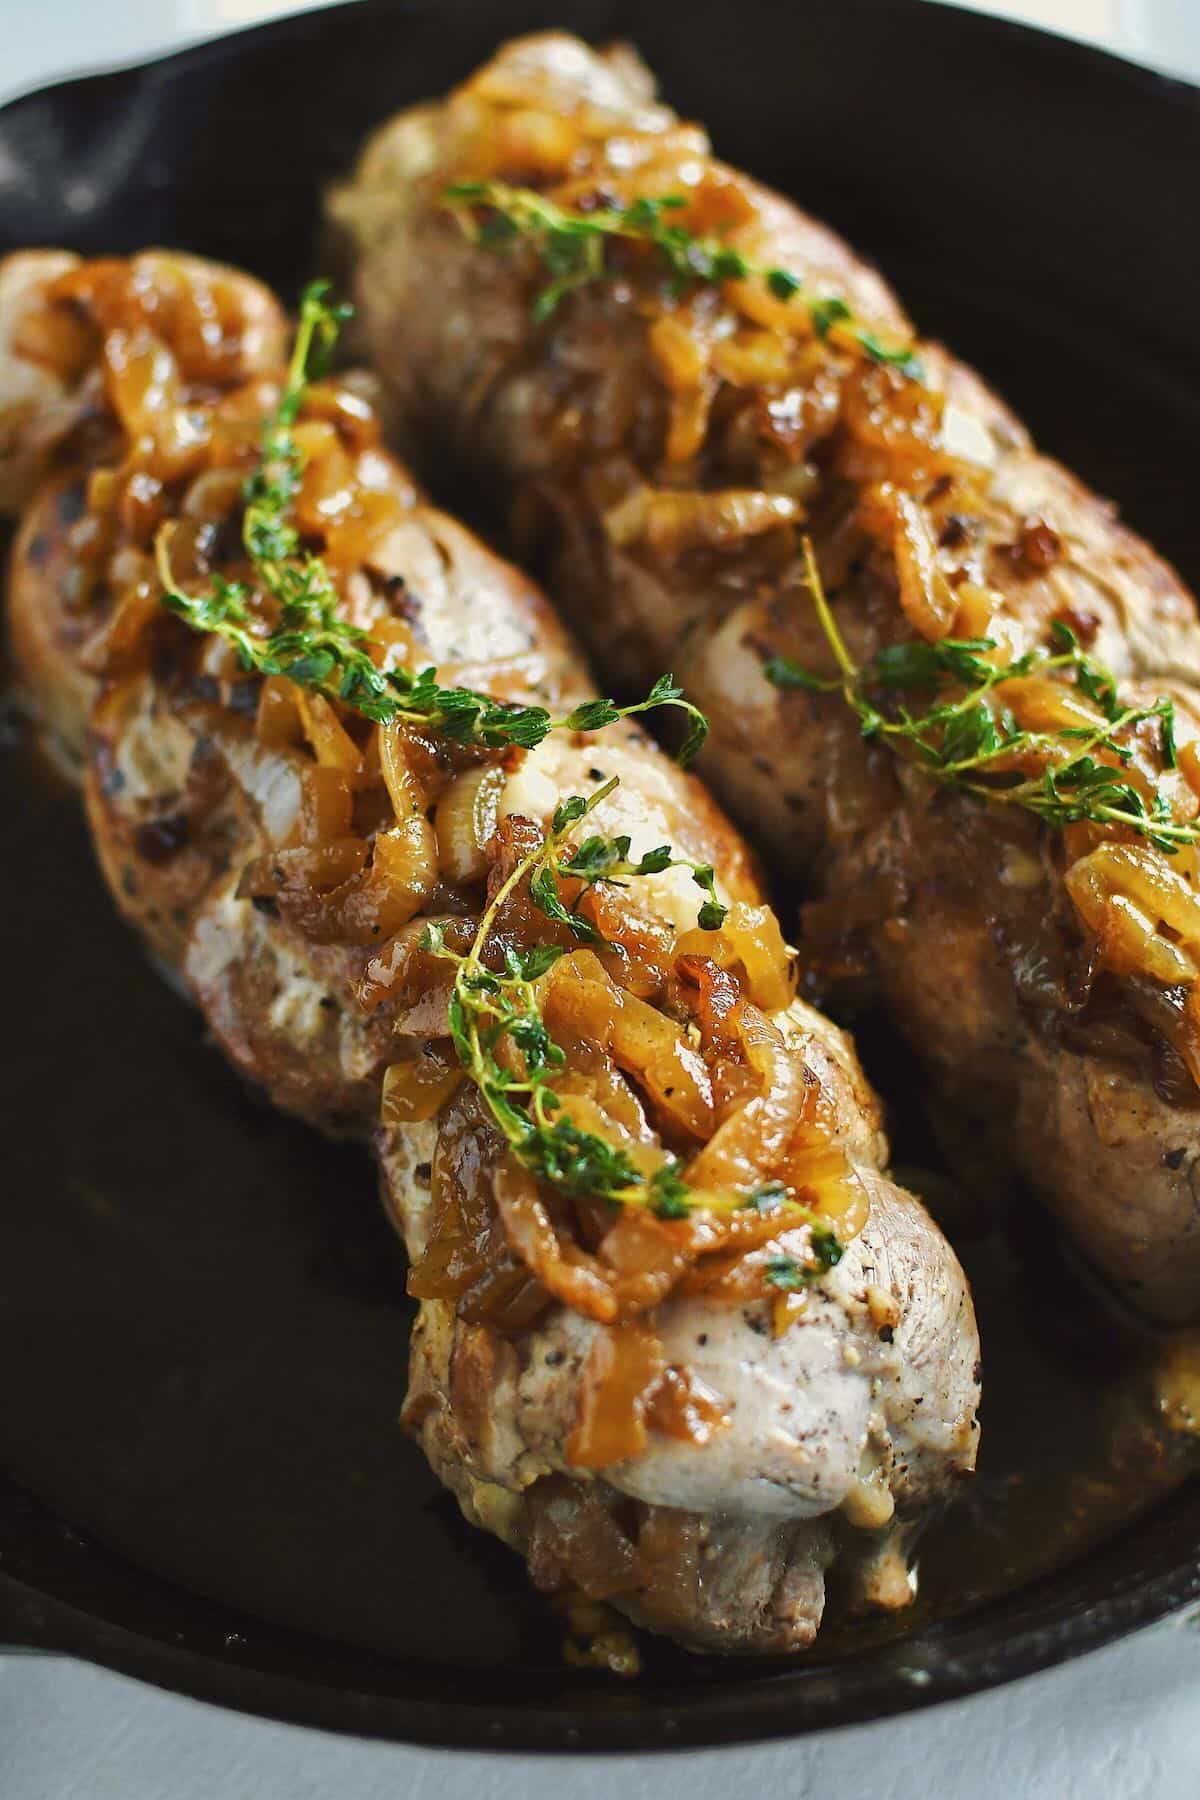 Stuffed Pork Tenderloins after searing and resting topped with extra onions and they thyme.